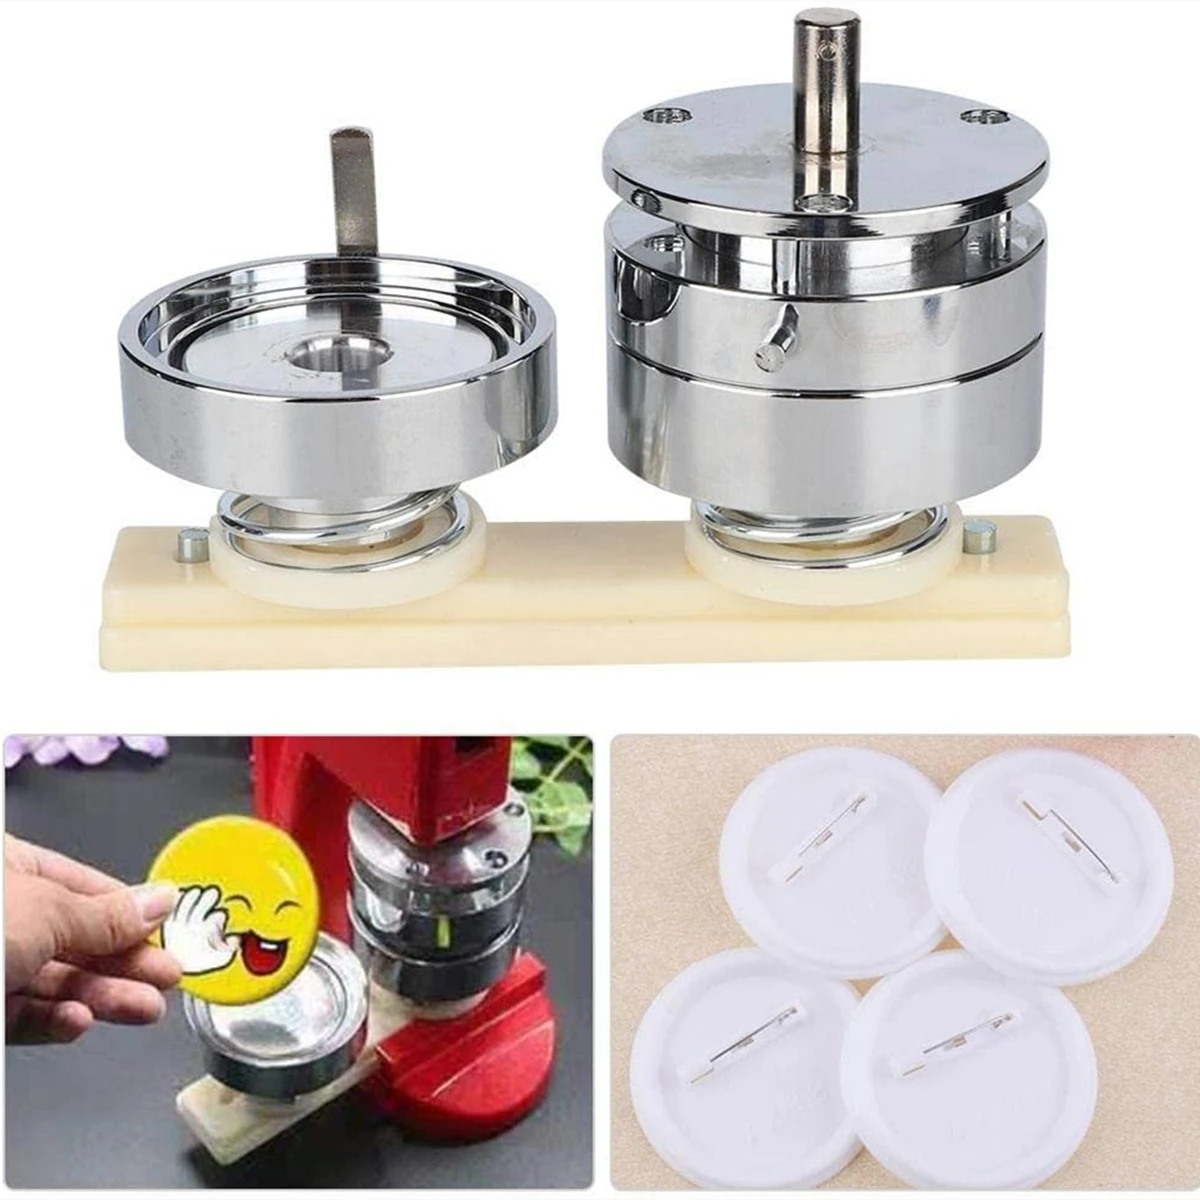 

25MM-75MM DIY Round Badge Making Dies Molds Badge Button Maker Die Mold for Button Pin Badge Press Maker Machine Punching Mould